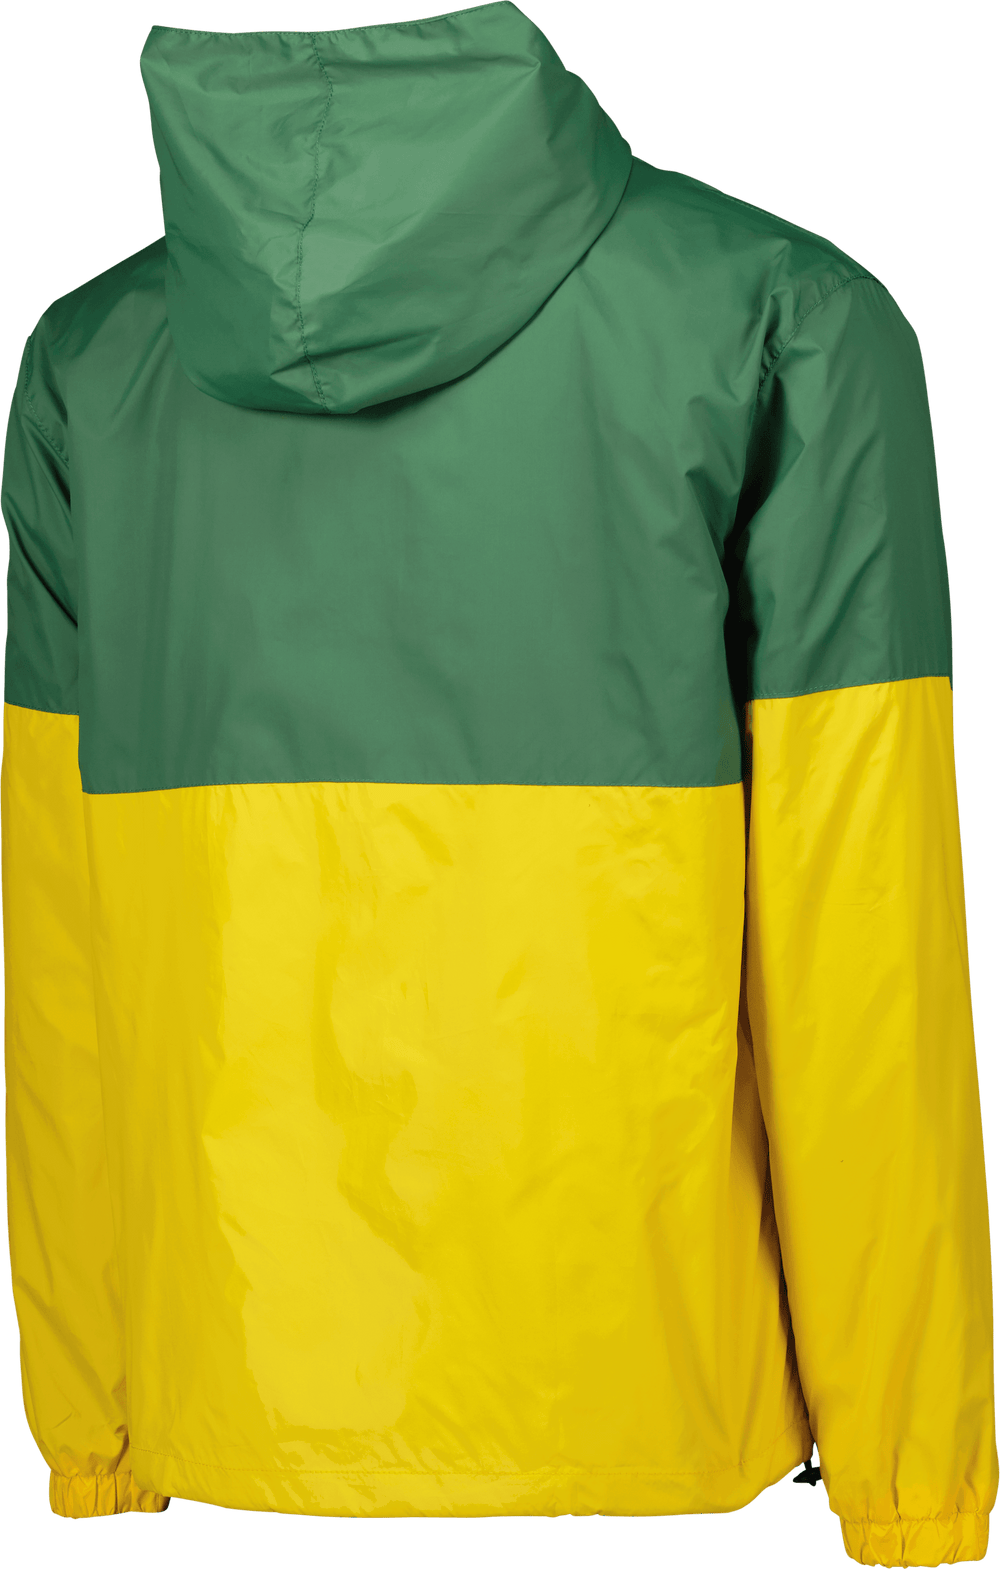 ROWDIES MEN'S GREEN AND YELLOW COLORBLOCK SPORT DESIGN SWEDEN FULL ZIP JACKET - The Bay Republic | Team Store of the Tampa Bay Rays & Rowdies